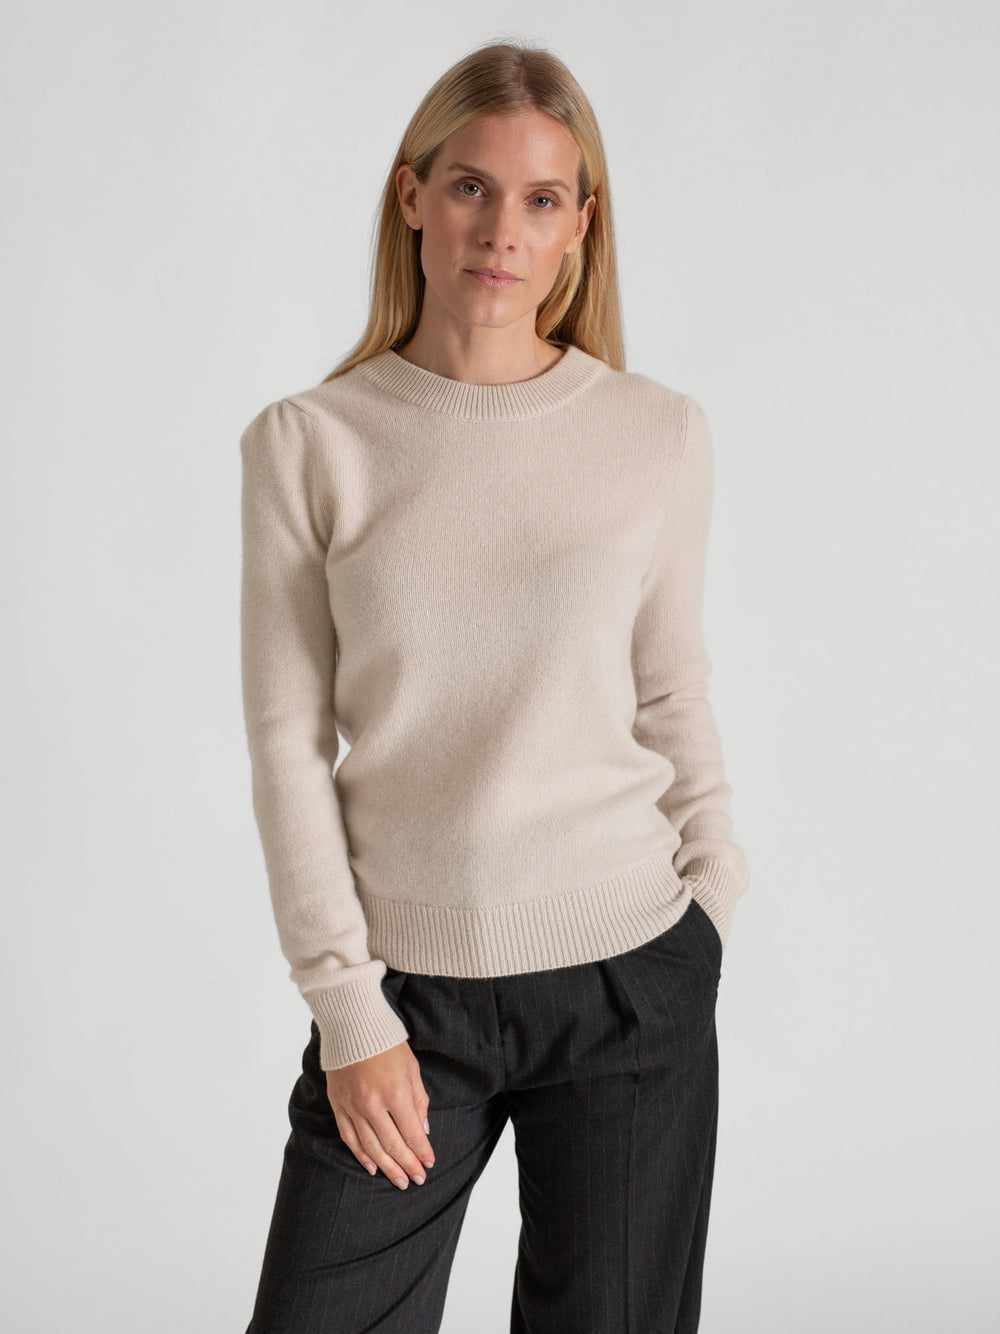 Cashmere sweater Lola in 100% cashmere by Kashmina